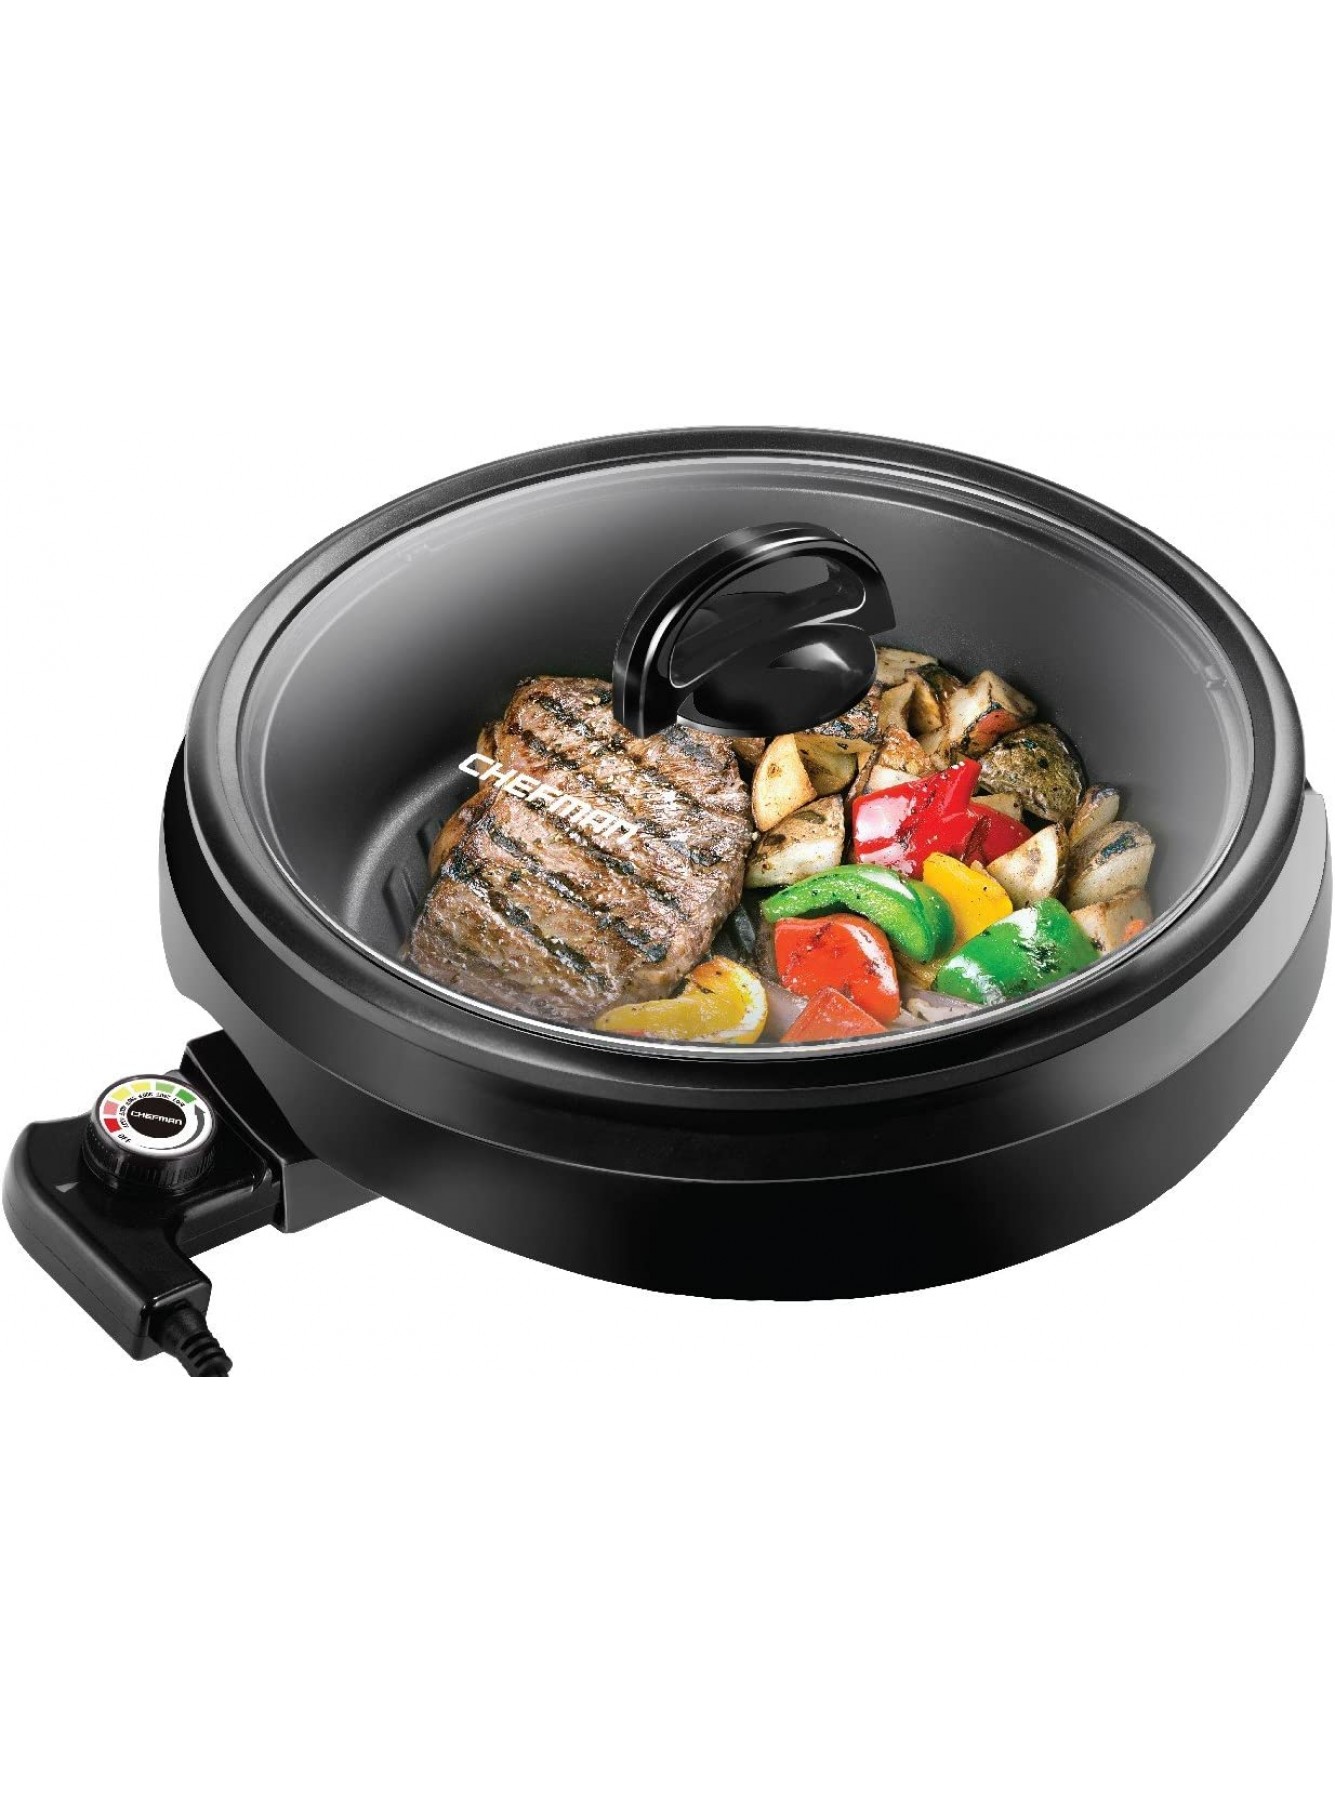 Chefman 3-In-1 Electric Indoor Grill Pot & Skillet Slow Cook Steam Simmer Stir Fry 10-Inch Nonstick Raised Line Griddle Pan Temperature Control Tempered Glass Lid 3-Quart Black-Round B0771Q85TV